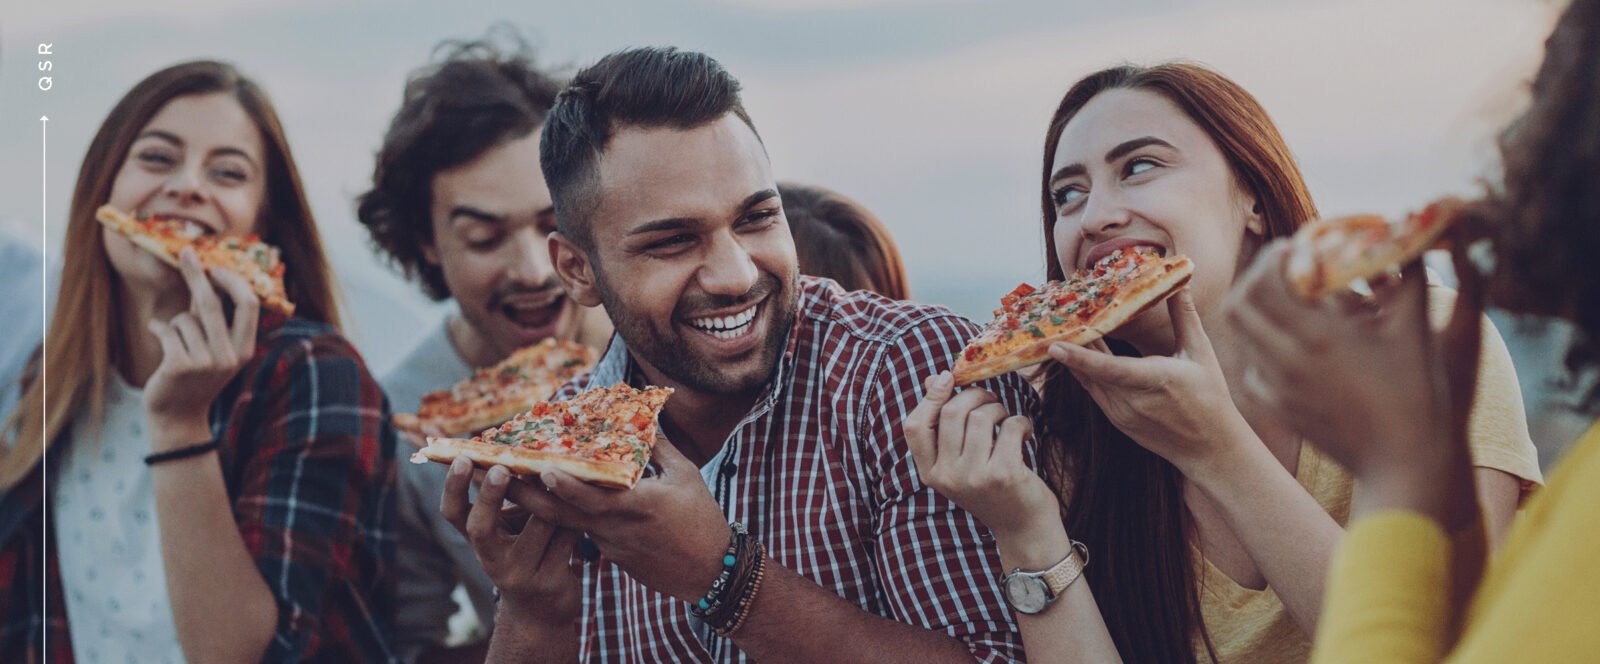 group of people eating pizza